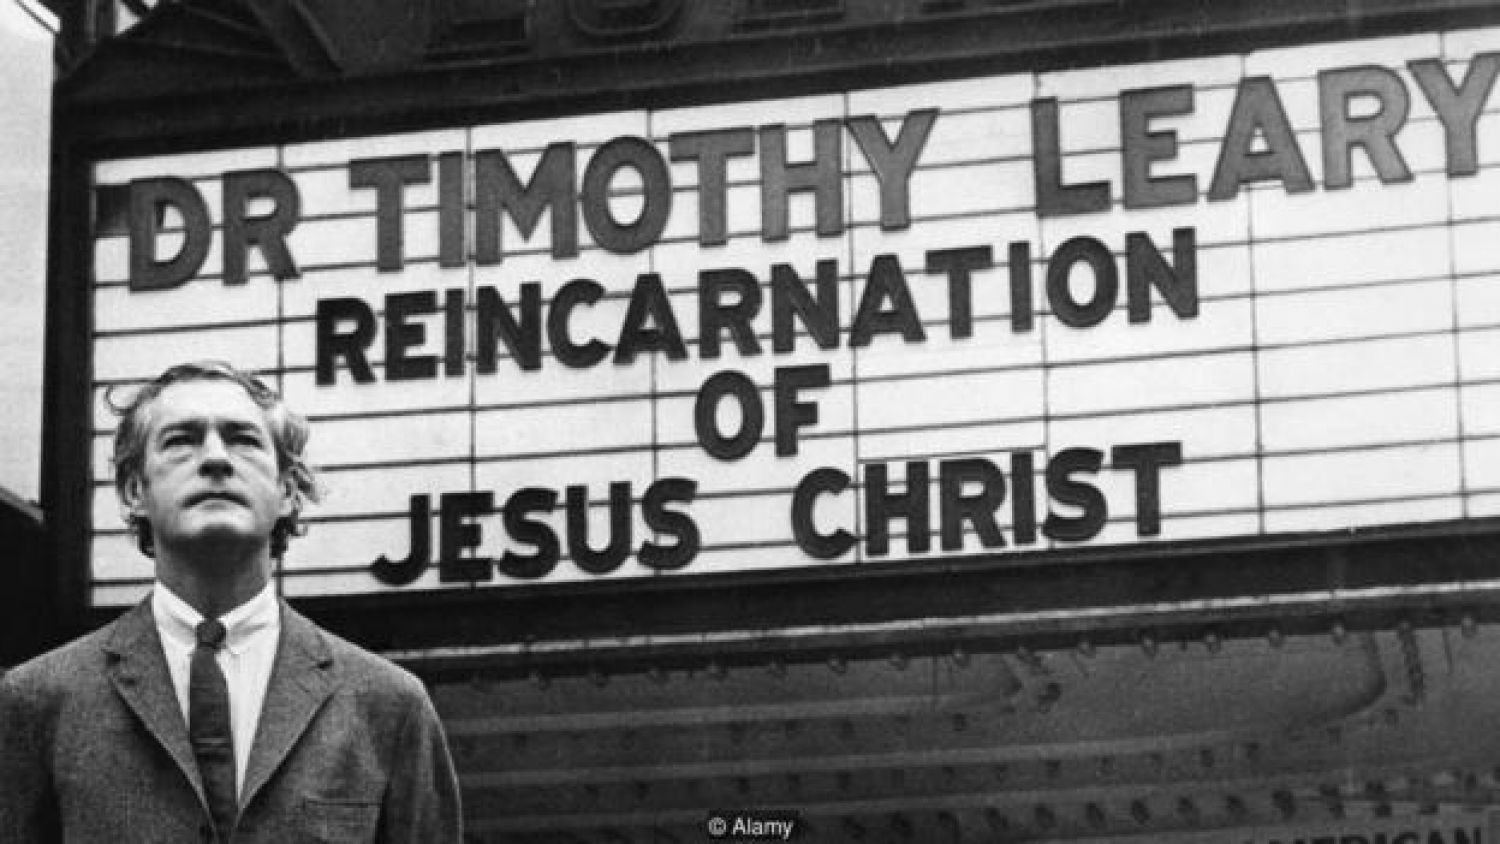 Timothy Leary and LSD Launch into counterculture mouvement in the 60s